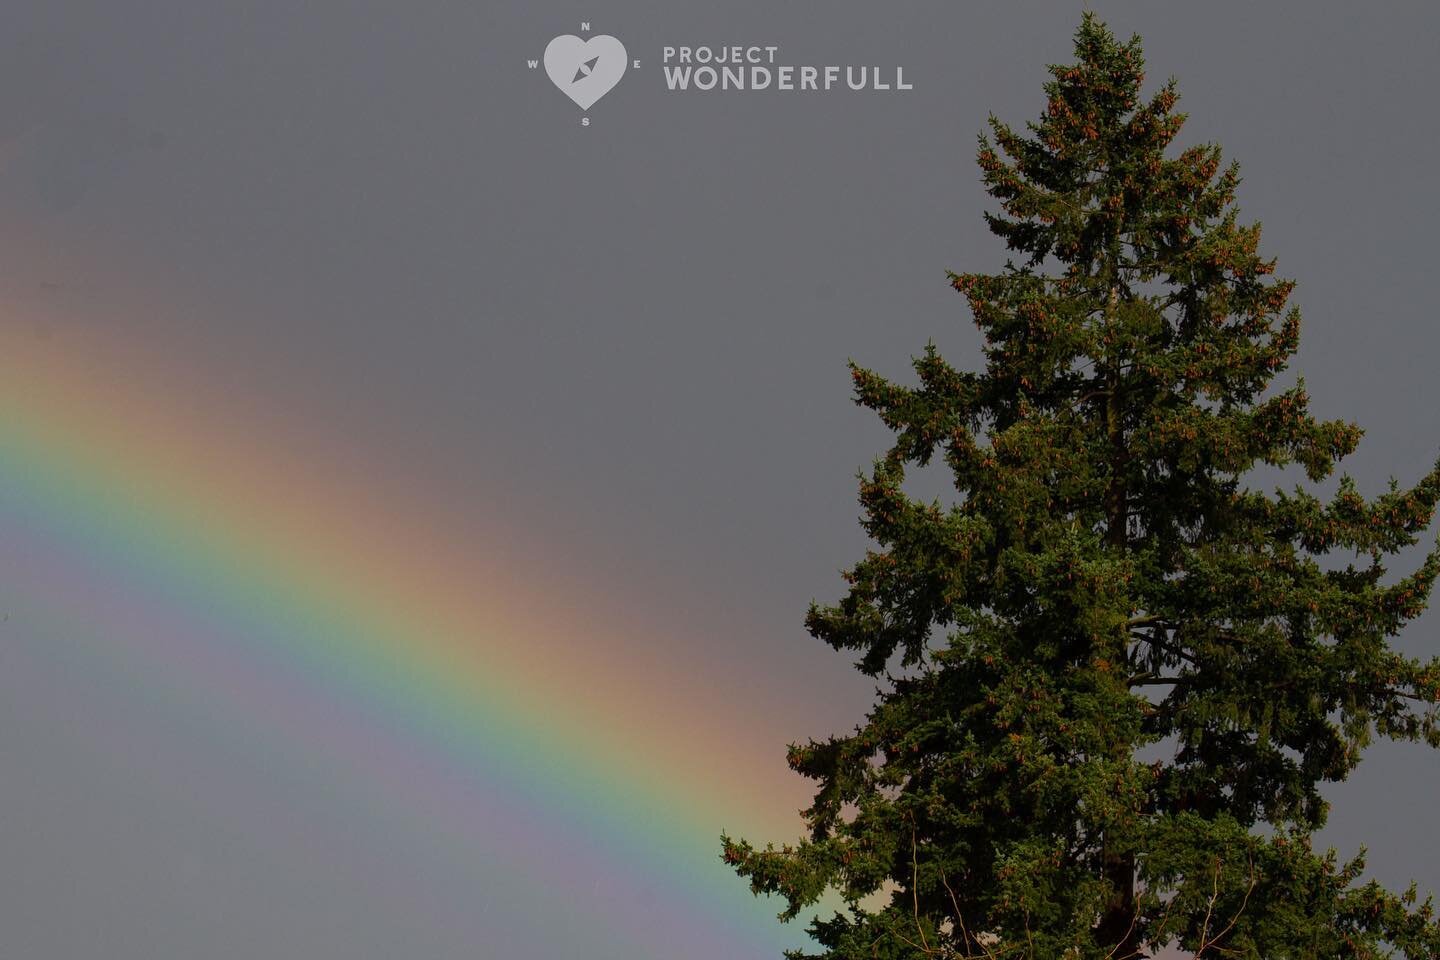 Rainbows are a reminder of the miracle that nature is. Happy Earth Day! ❤️🧡💛💚💙💜

#beautyheals 

Today&rsquo;s WonderFULL: Miracle Evidence 

(Portland, OR) 

Today&rsquo;s MindFULL Seeing Challenge: Today, take an extra long walk if you can and 